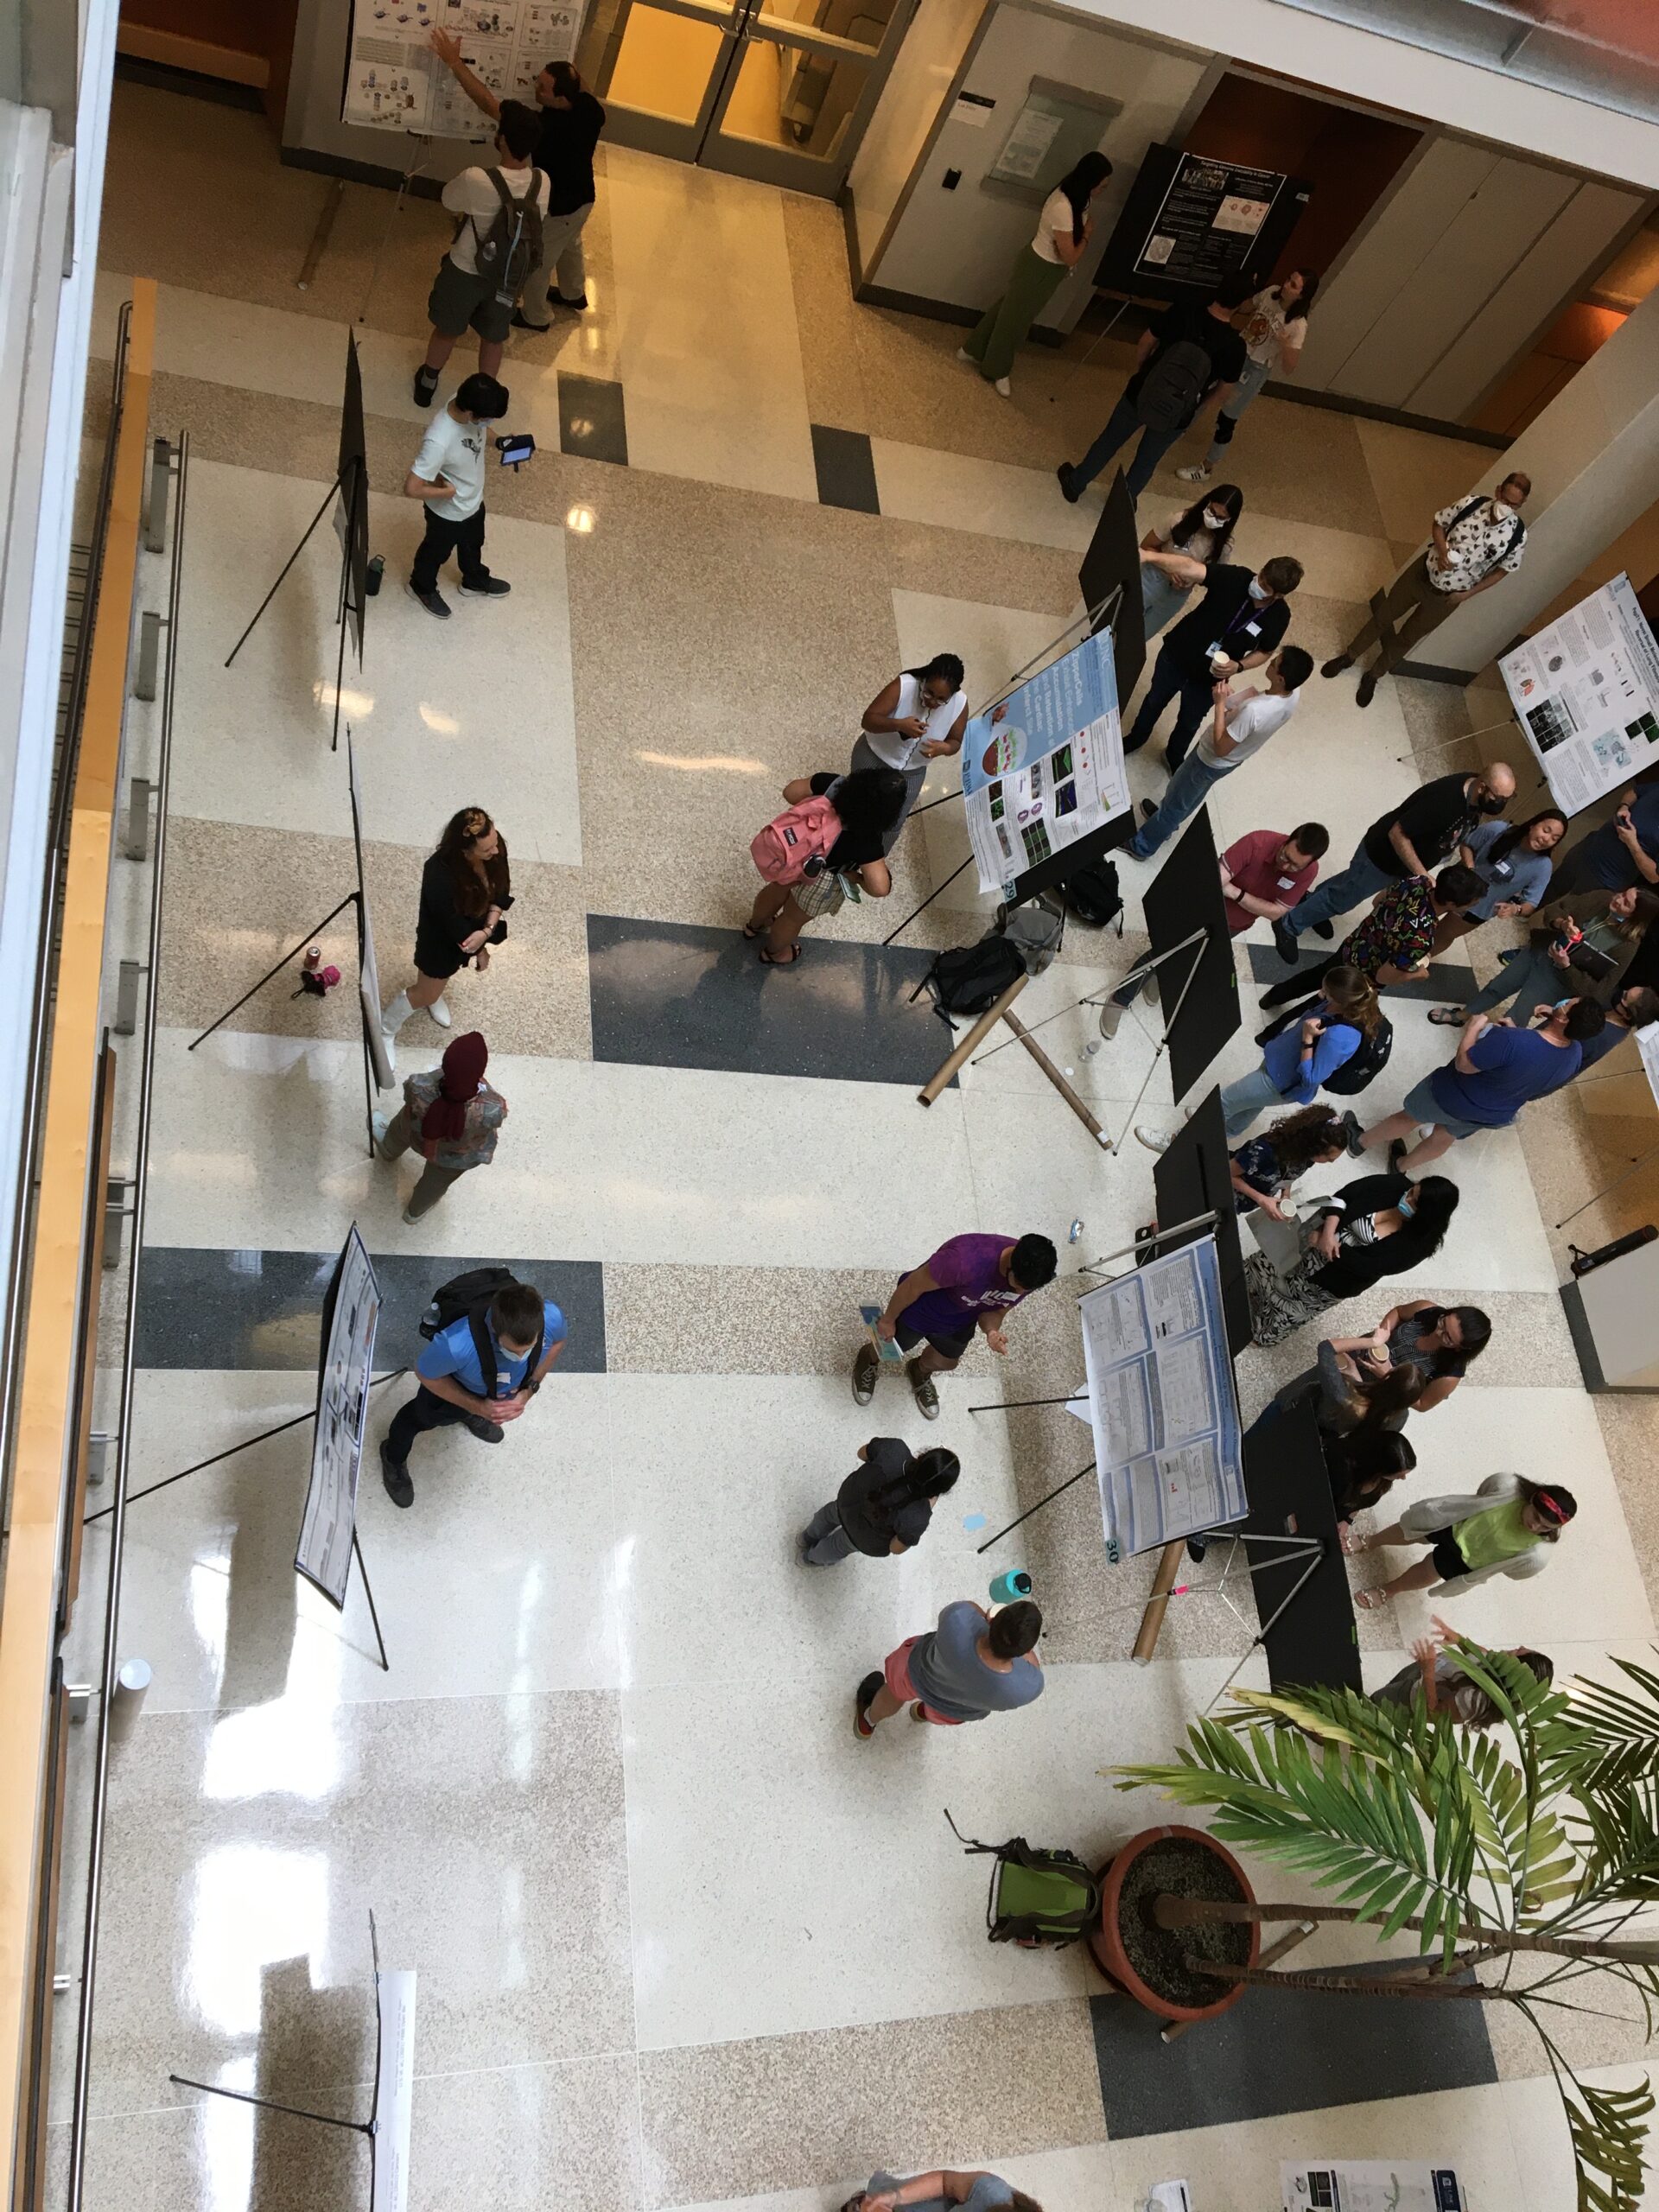 Poster session view from above